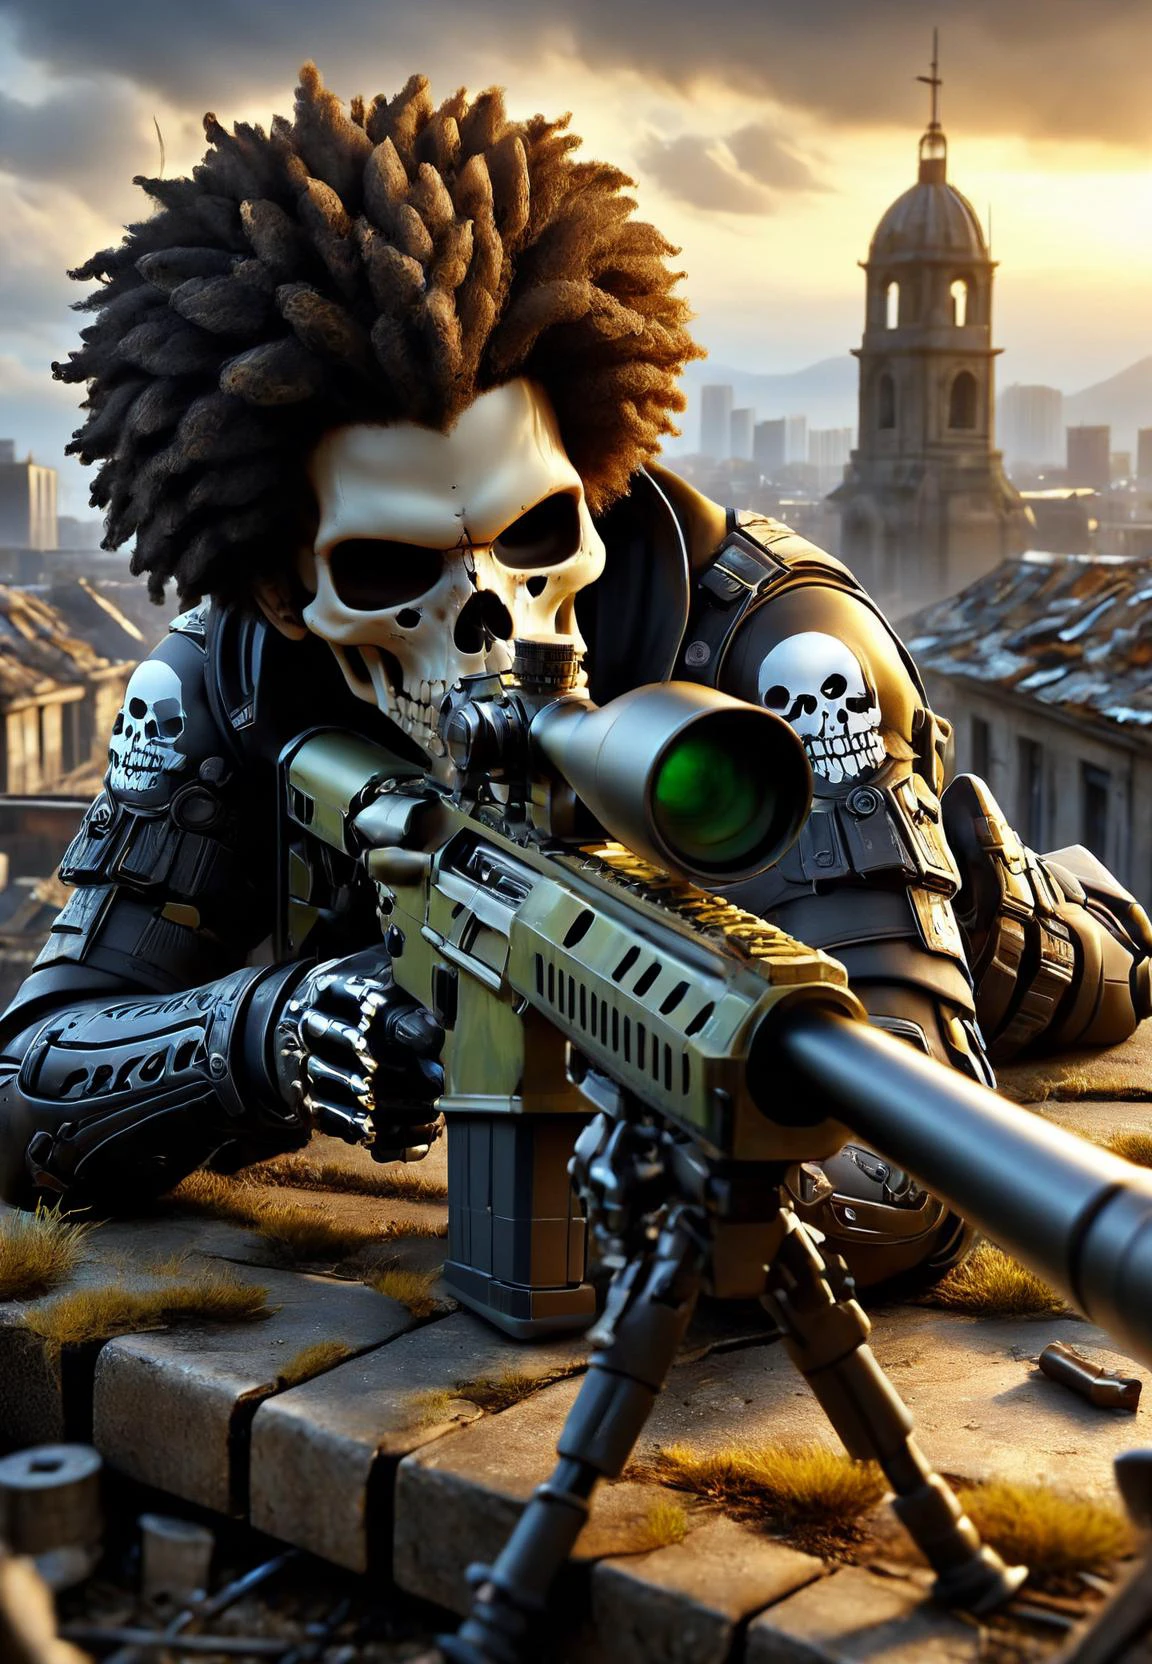 AmAzing quAlity, mAsterpiece, best quAlity, hyper detAiled, ultrA detAiled, UHD, Tiefenschärfe, detAil eyes, from Above, Horizont,
A (Schädel:1.4) with Afro hAir lAying on the roof, cAmouflAge suit, Aiming At the cAmerA, Action shot, reflektierendes Licht, alte Gebäude, AbAndoned city, wAr,
Scharfschützengewehr, cArtridge cAse,
